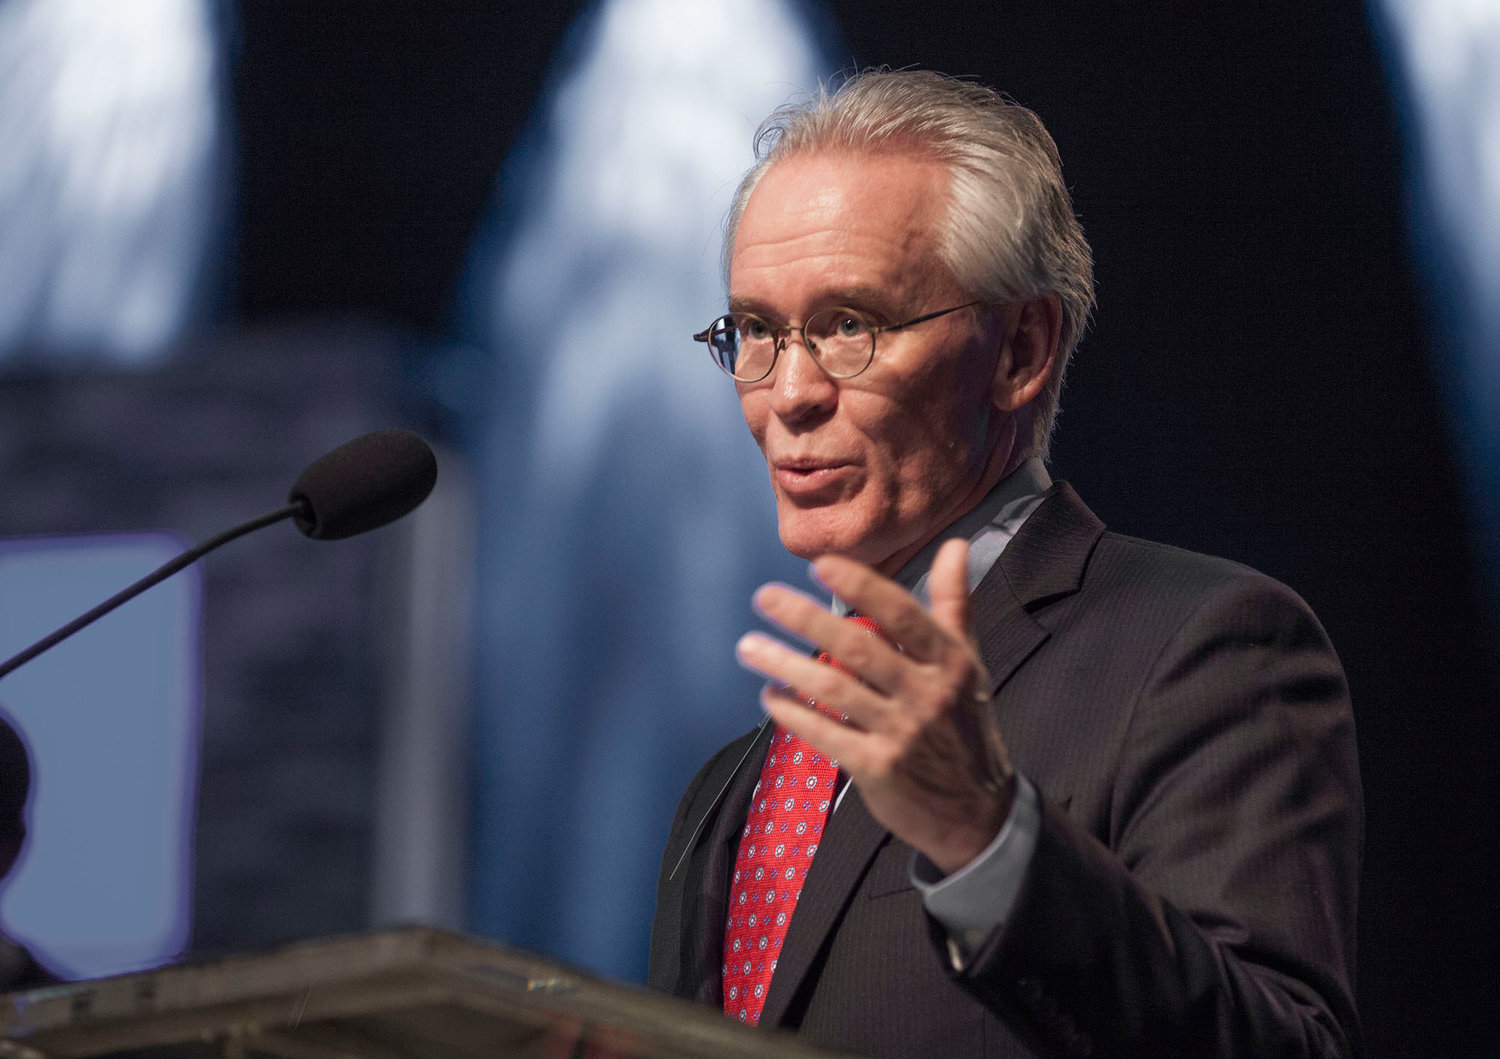 Truett McConnell University Professor Barry McCarty speaks at a Southern Baptist Convention meeting. McCarty is now dean of the university's new School of Communication. (Photo/Baptist Press)